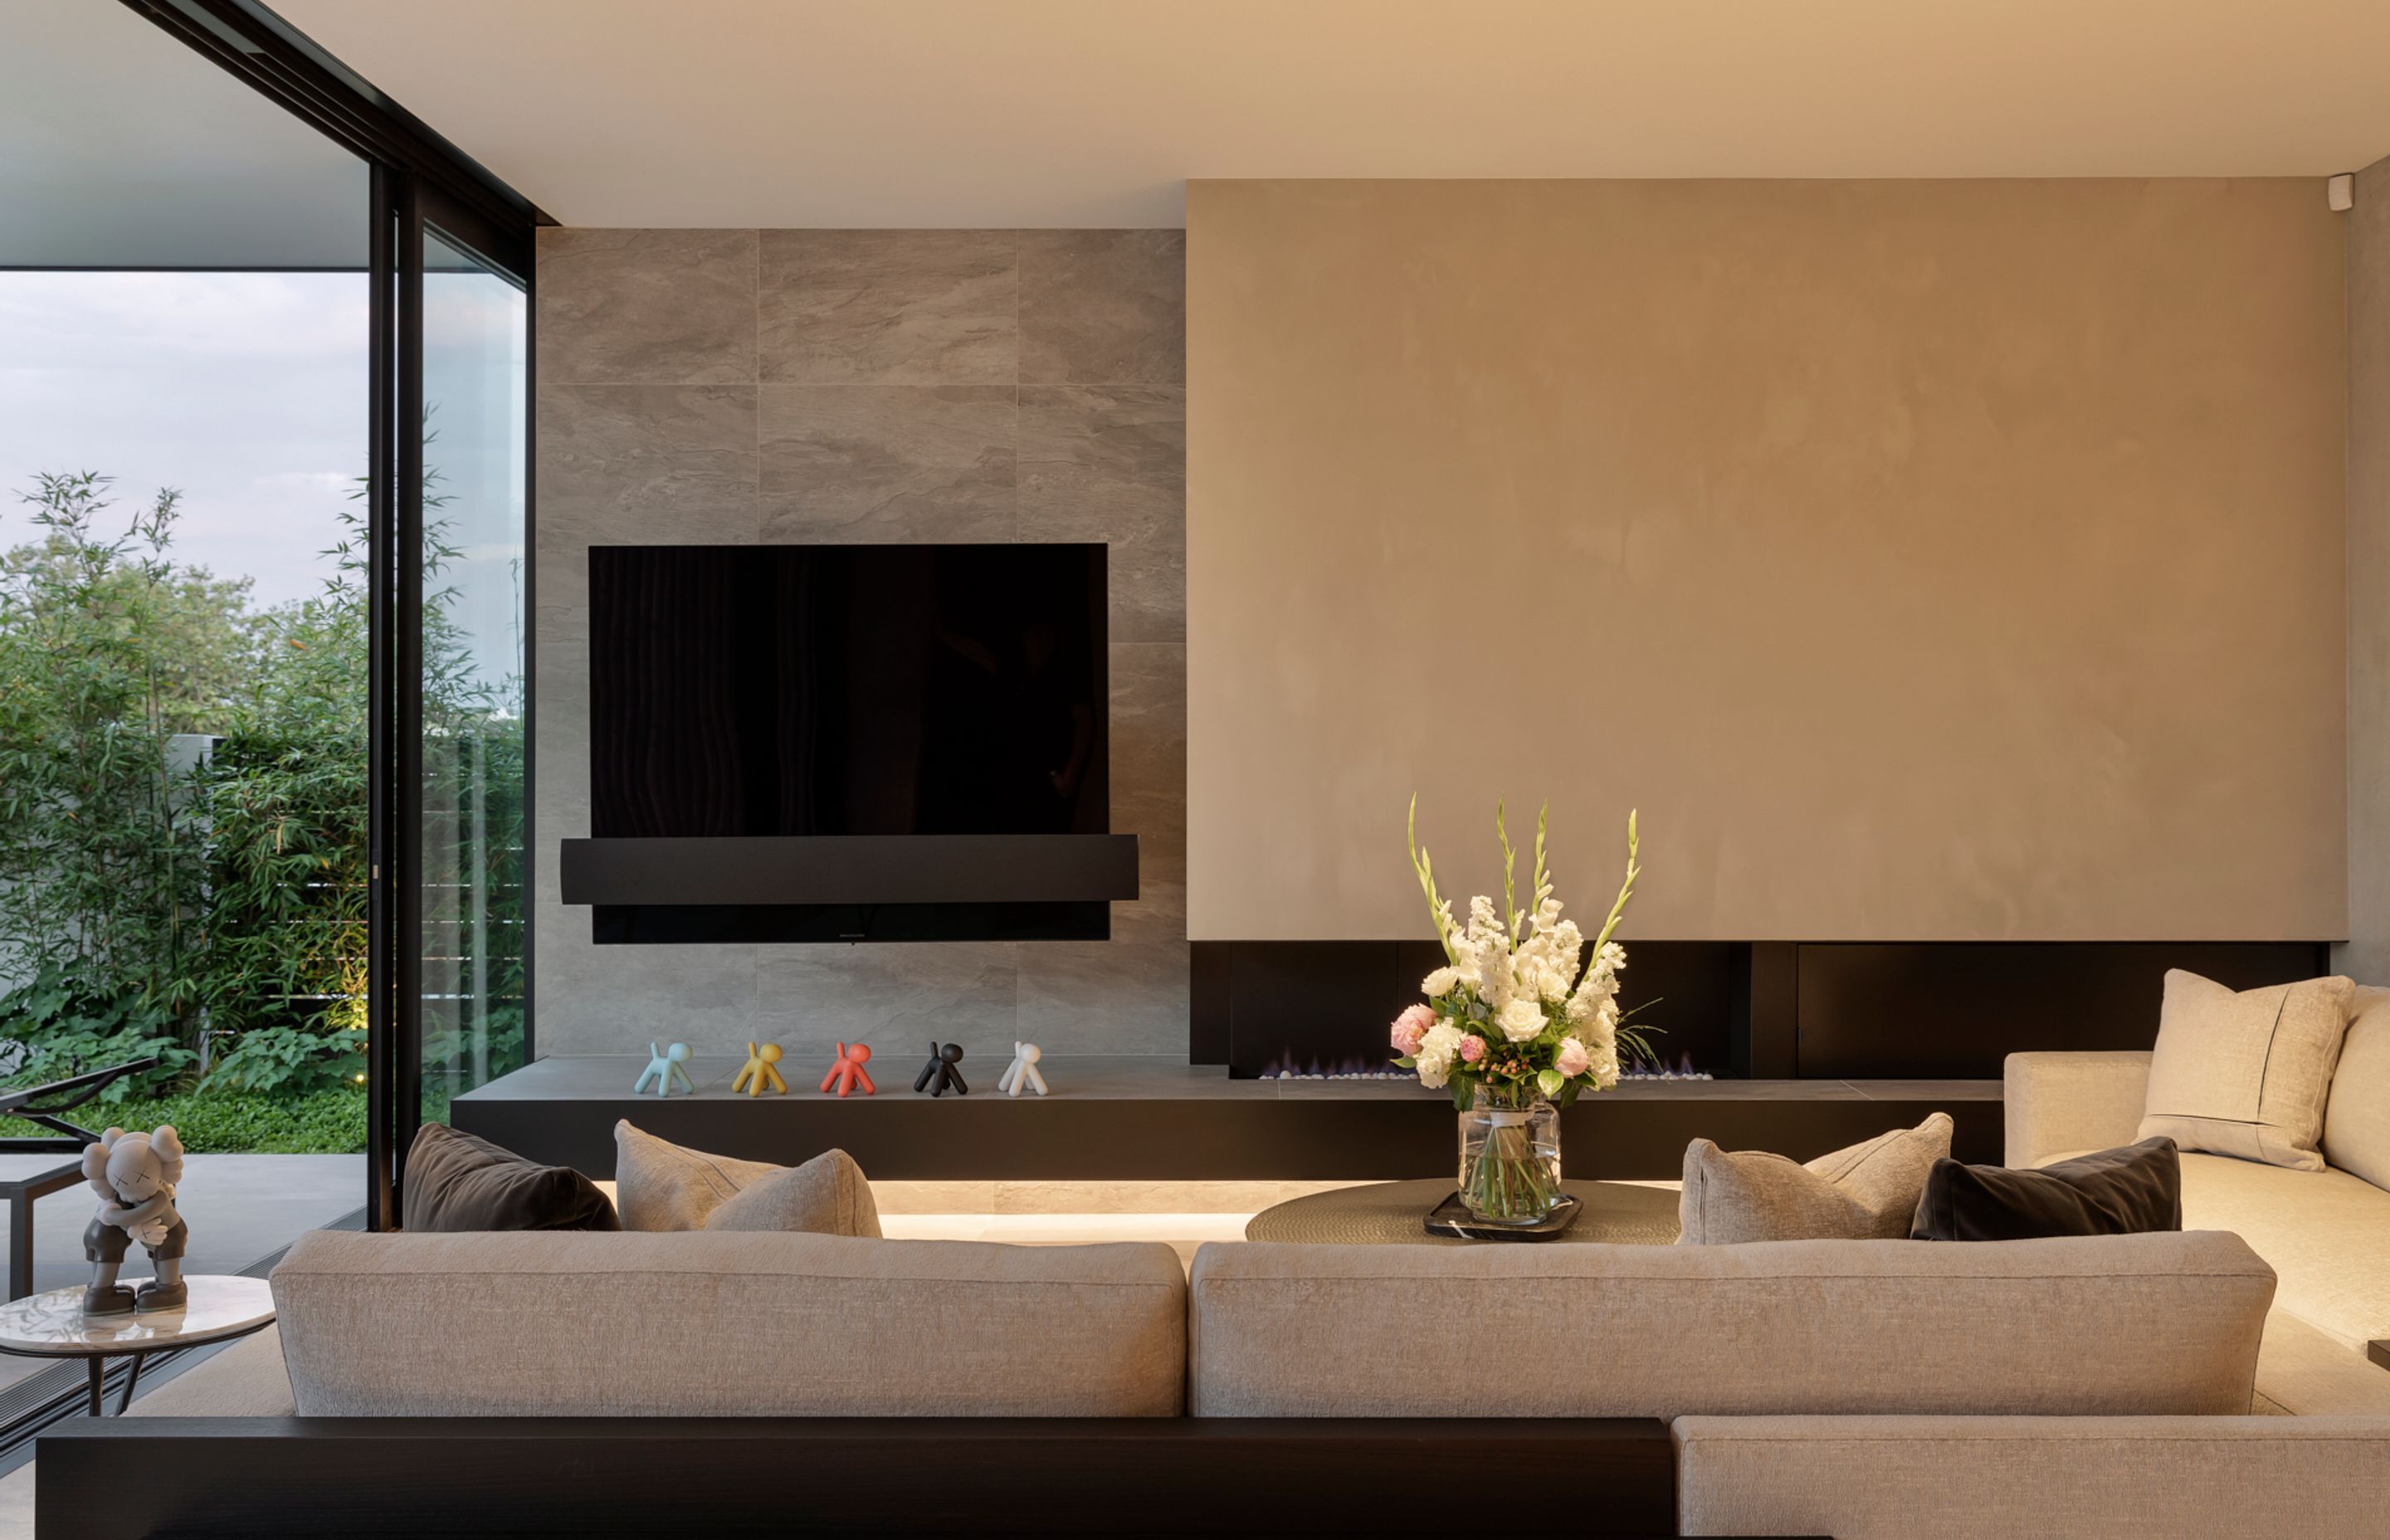 The lounge is a cleverly curated modernist composition of fireplace, large-scale television, sofas and coffee table.